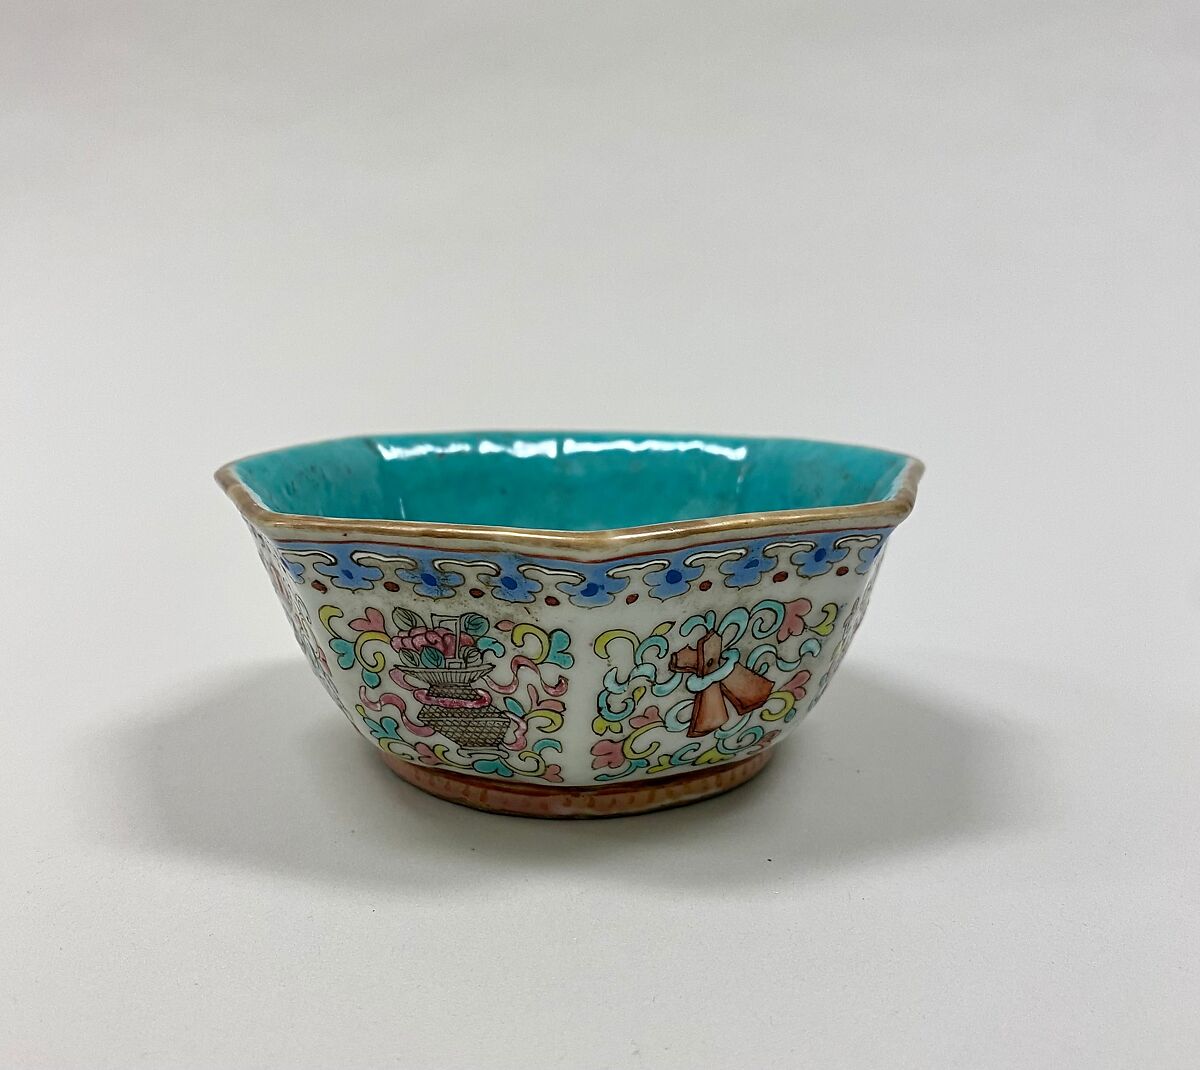 Octagonal bowl with symbols of the Eight Immortals, Porcelain painted in overglaze polychrome enamels, turqoise green glaze inside (Jingdezhen ware), China 